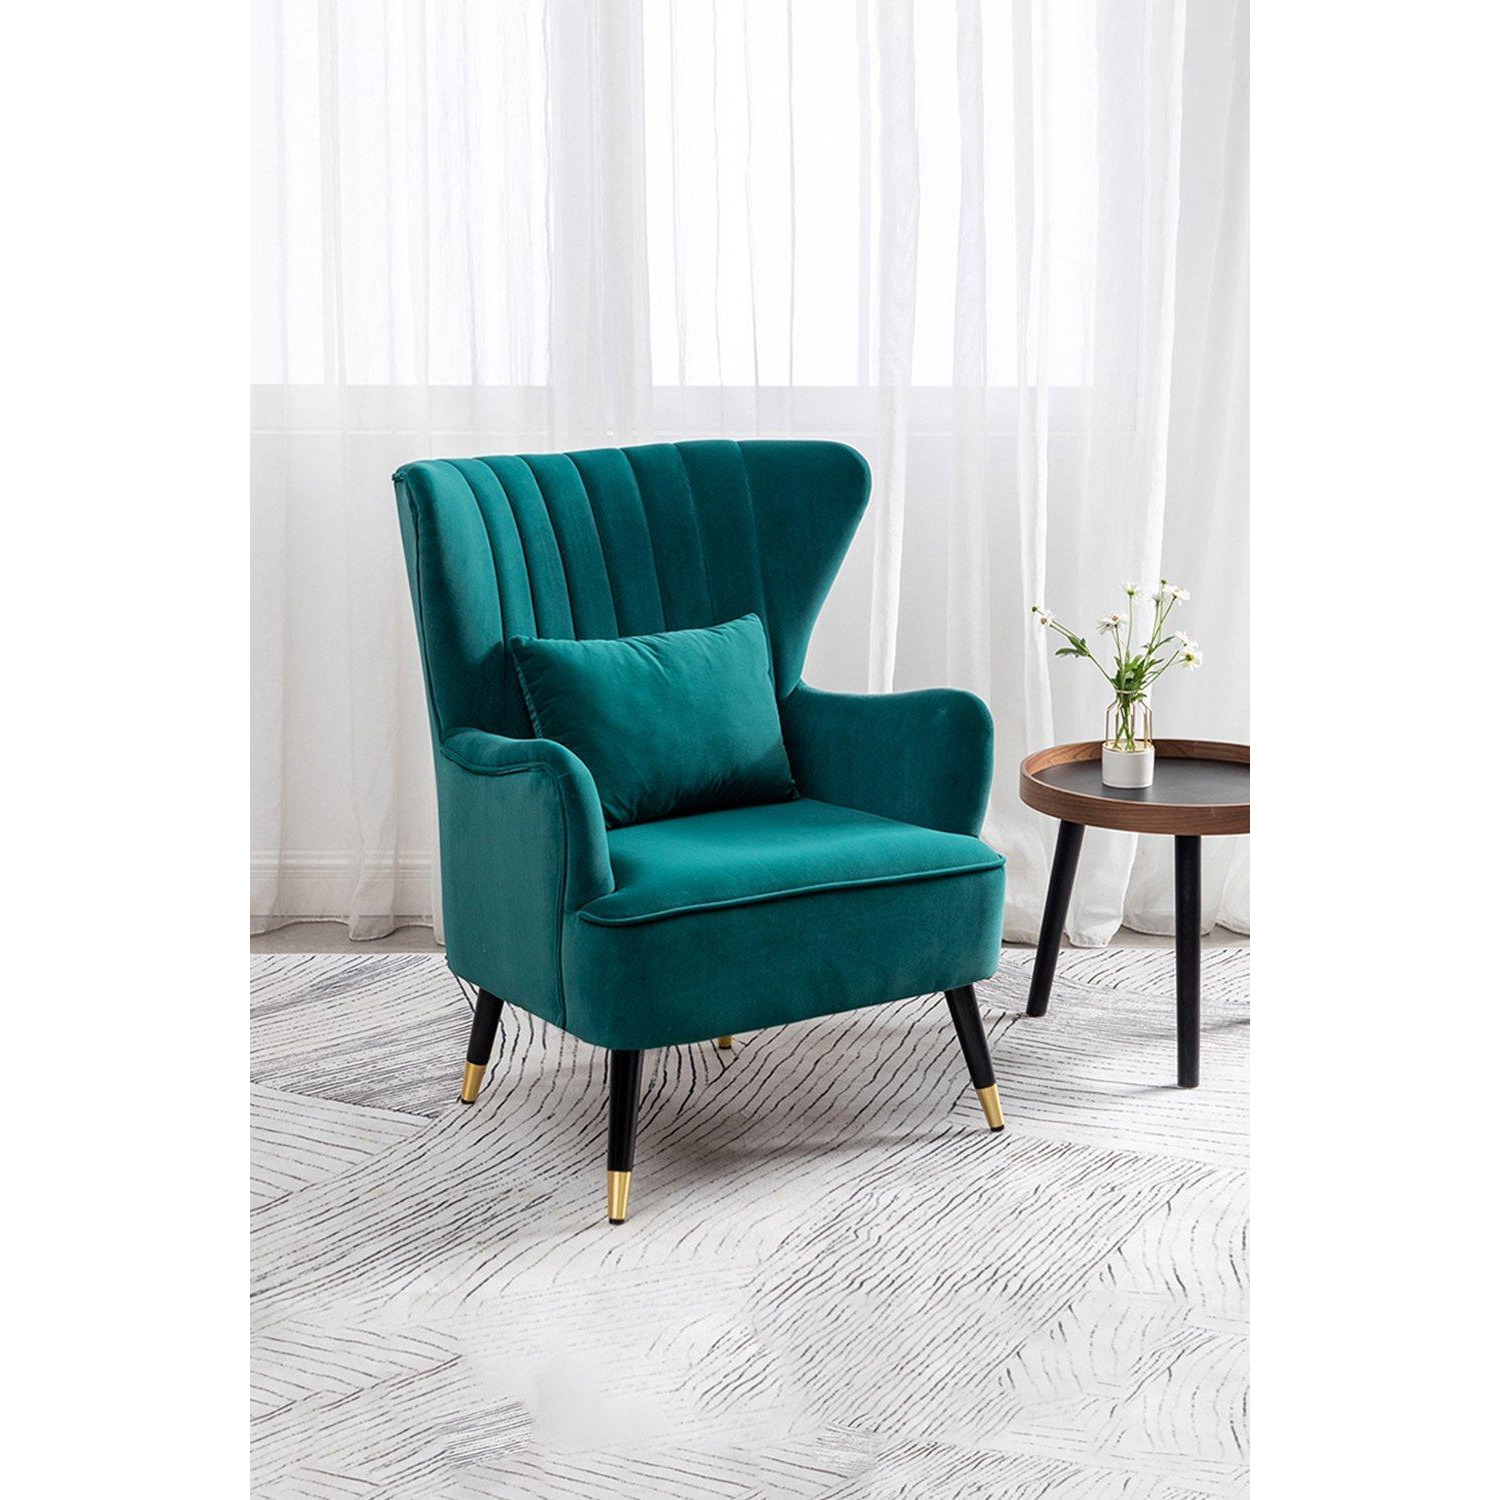 Green Velvet Stripe Curved Wing Back Armchair with Pillow - image 1